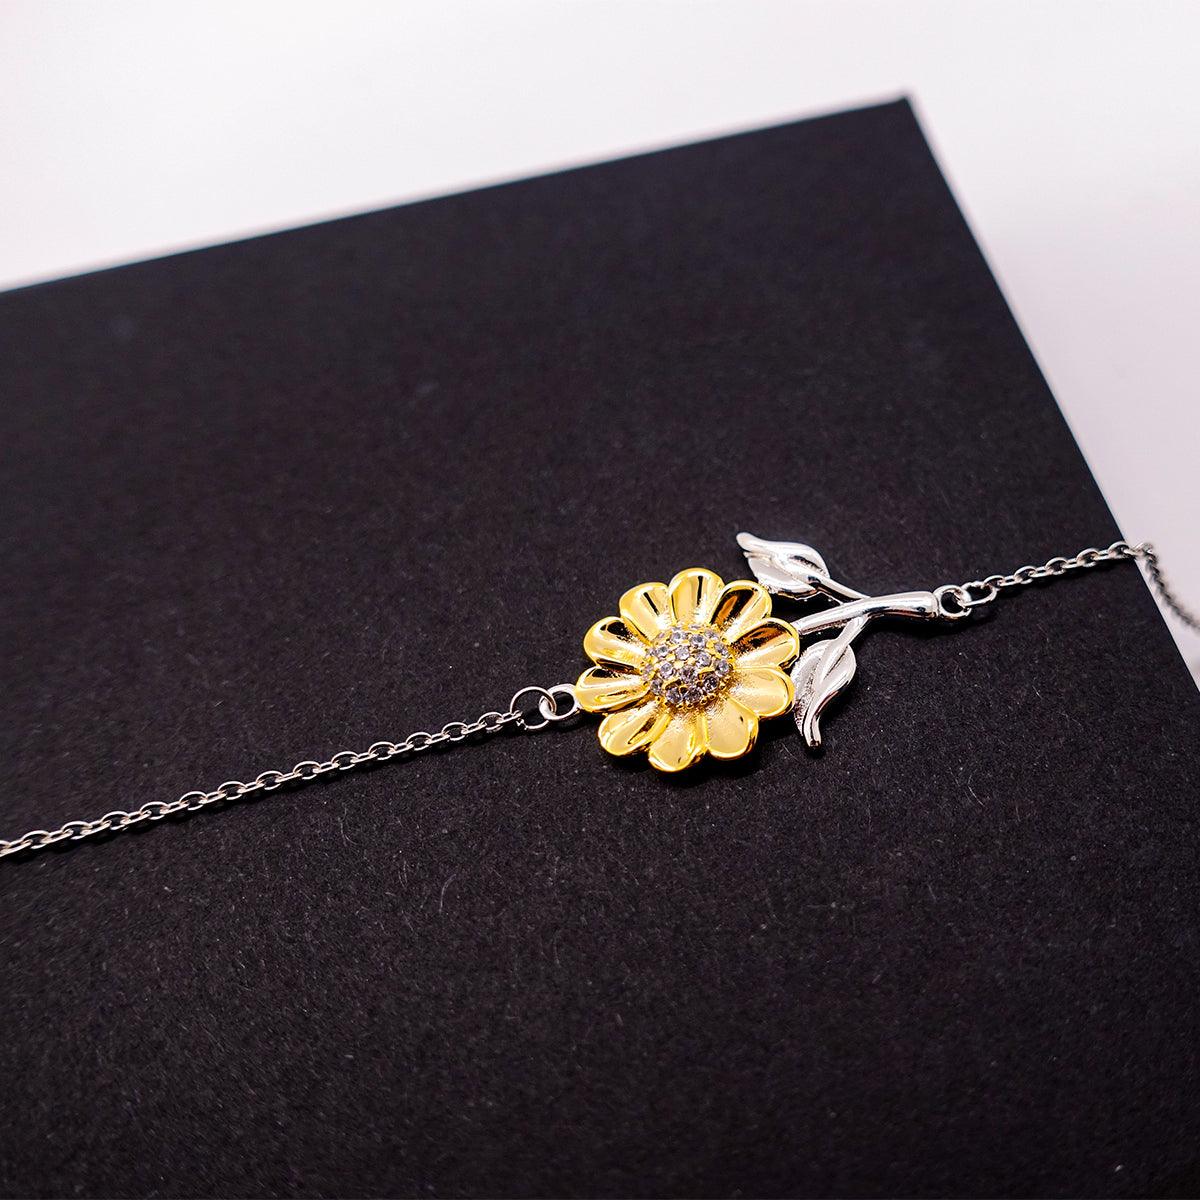 Pediatrician Sunflower Bracelet - Thanks for being who you are - Birthday Christmas Jewelry Gifts Coworkers Colleague Boss - Mallard Moon Gift Shop